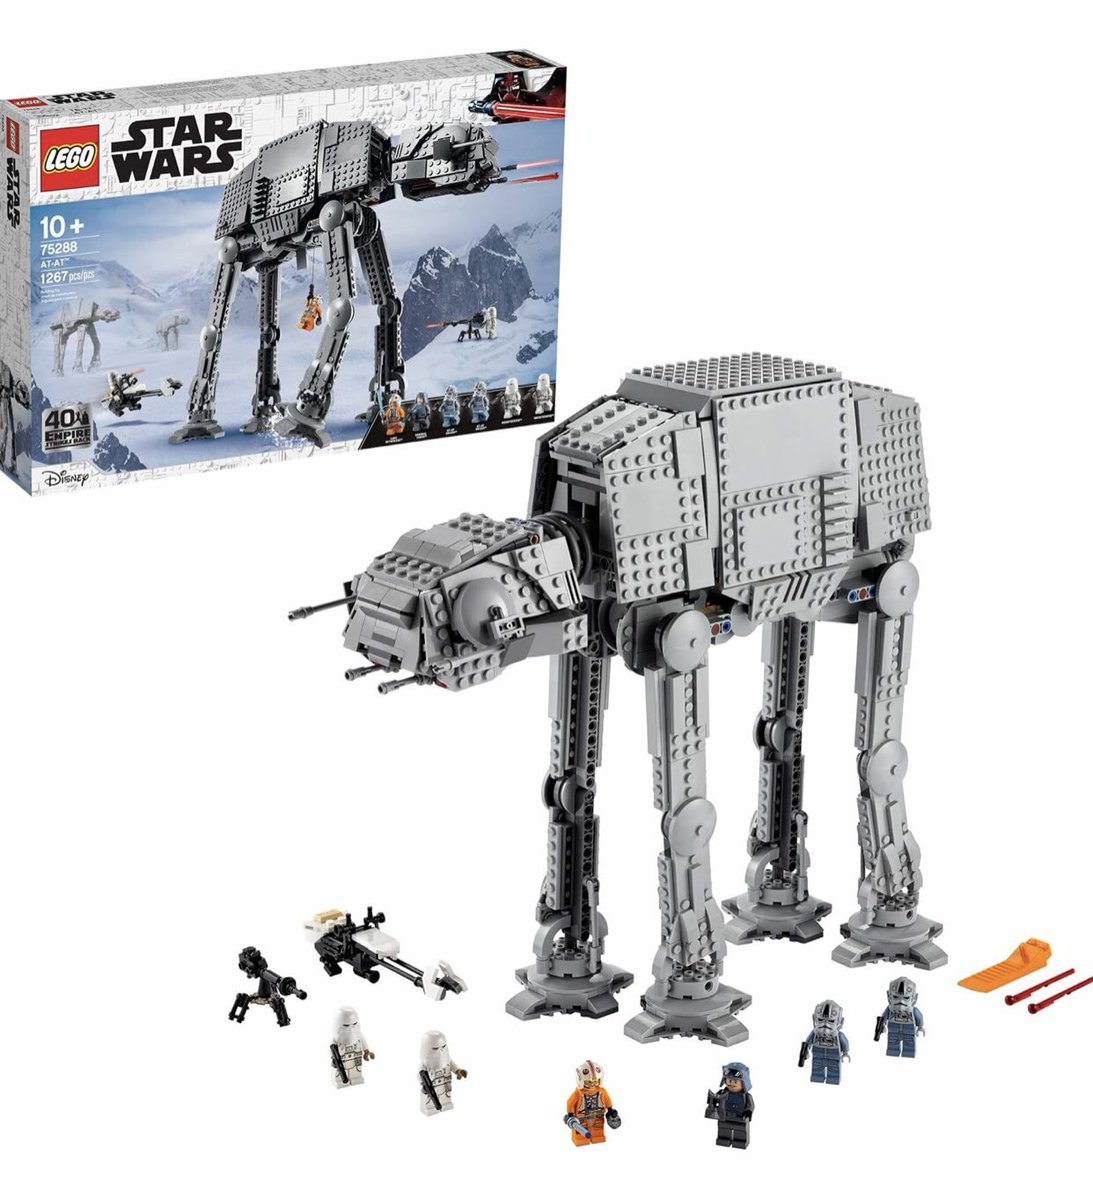 Amazon has the retired #LEGO #StarWars AT-AT 75288 for retail price (169.99) #ad amzn.to/43W7PfP